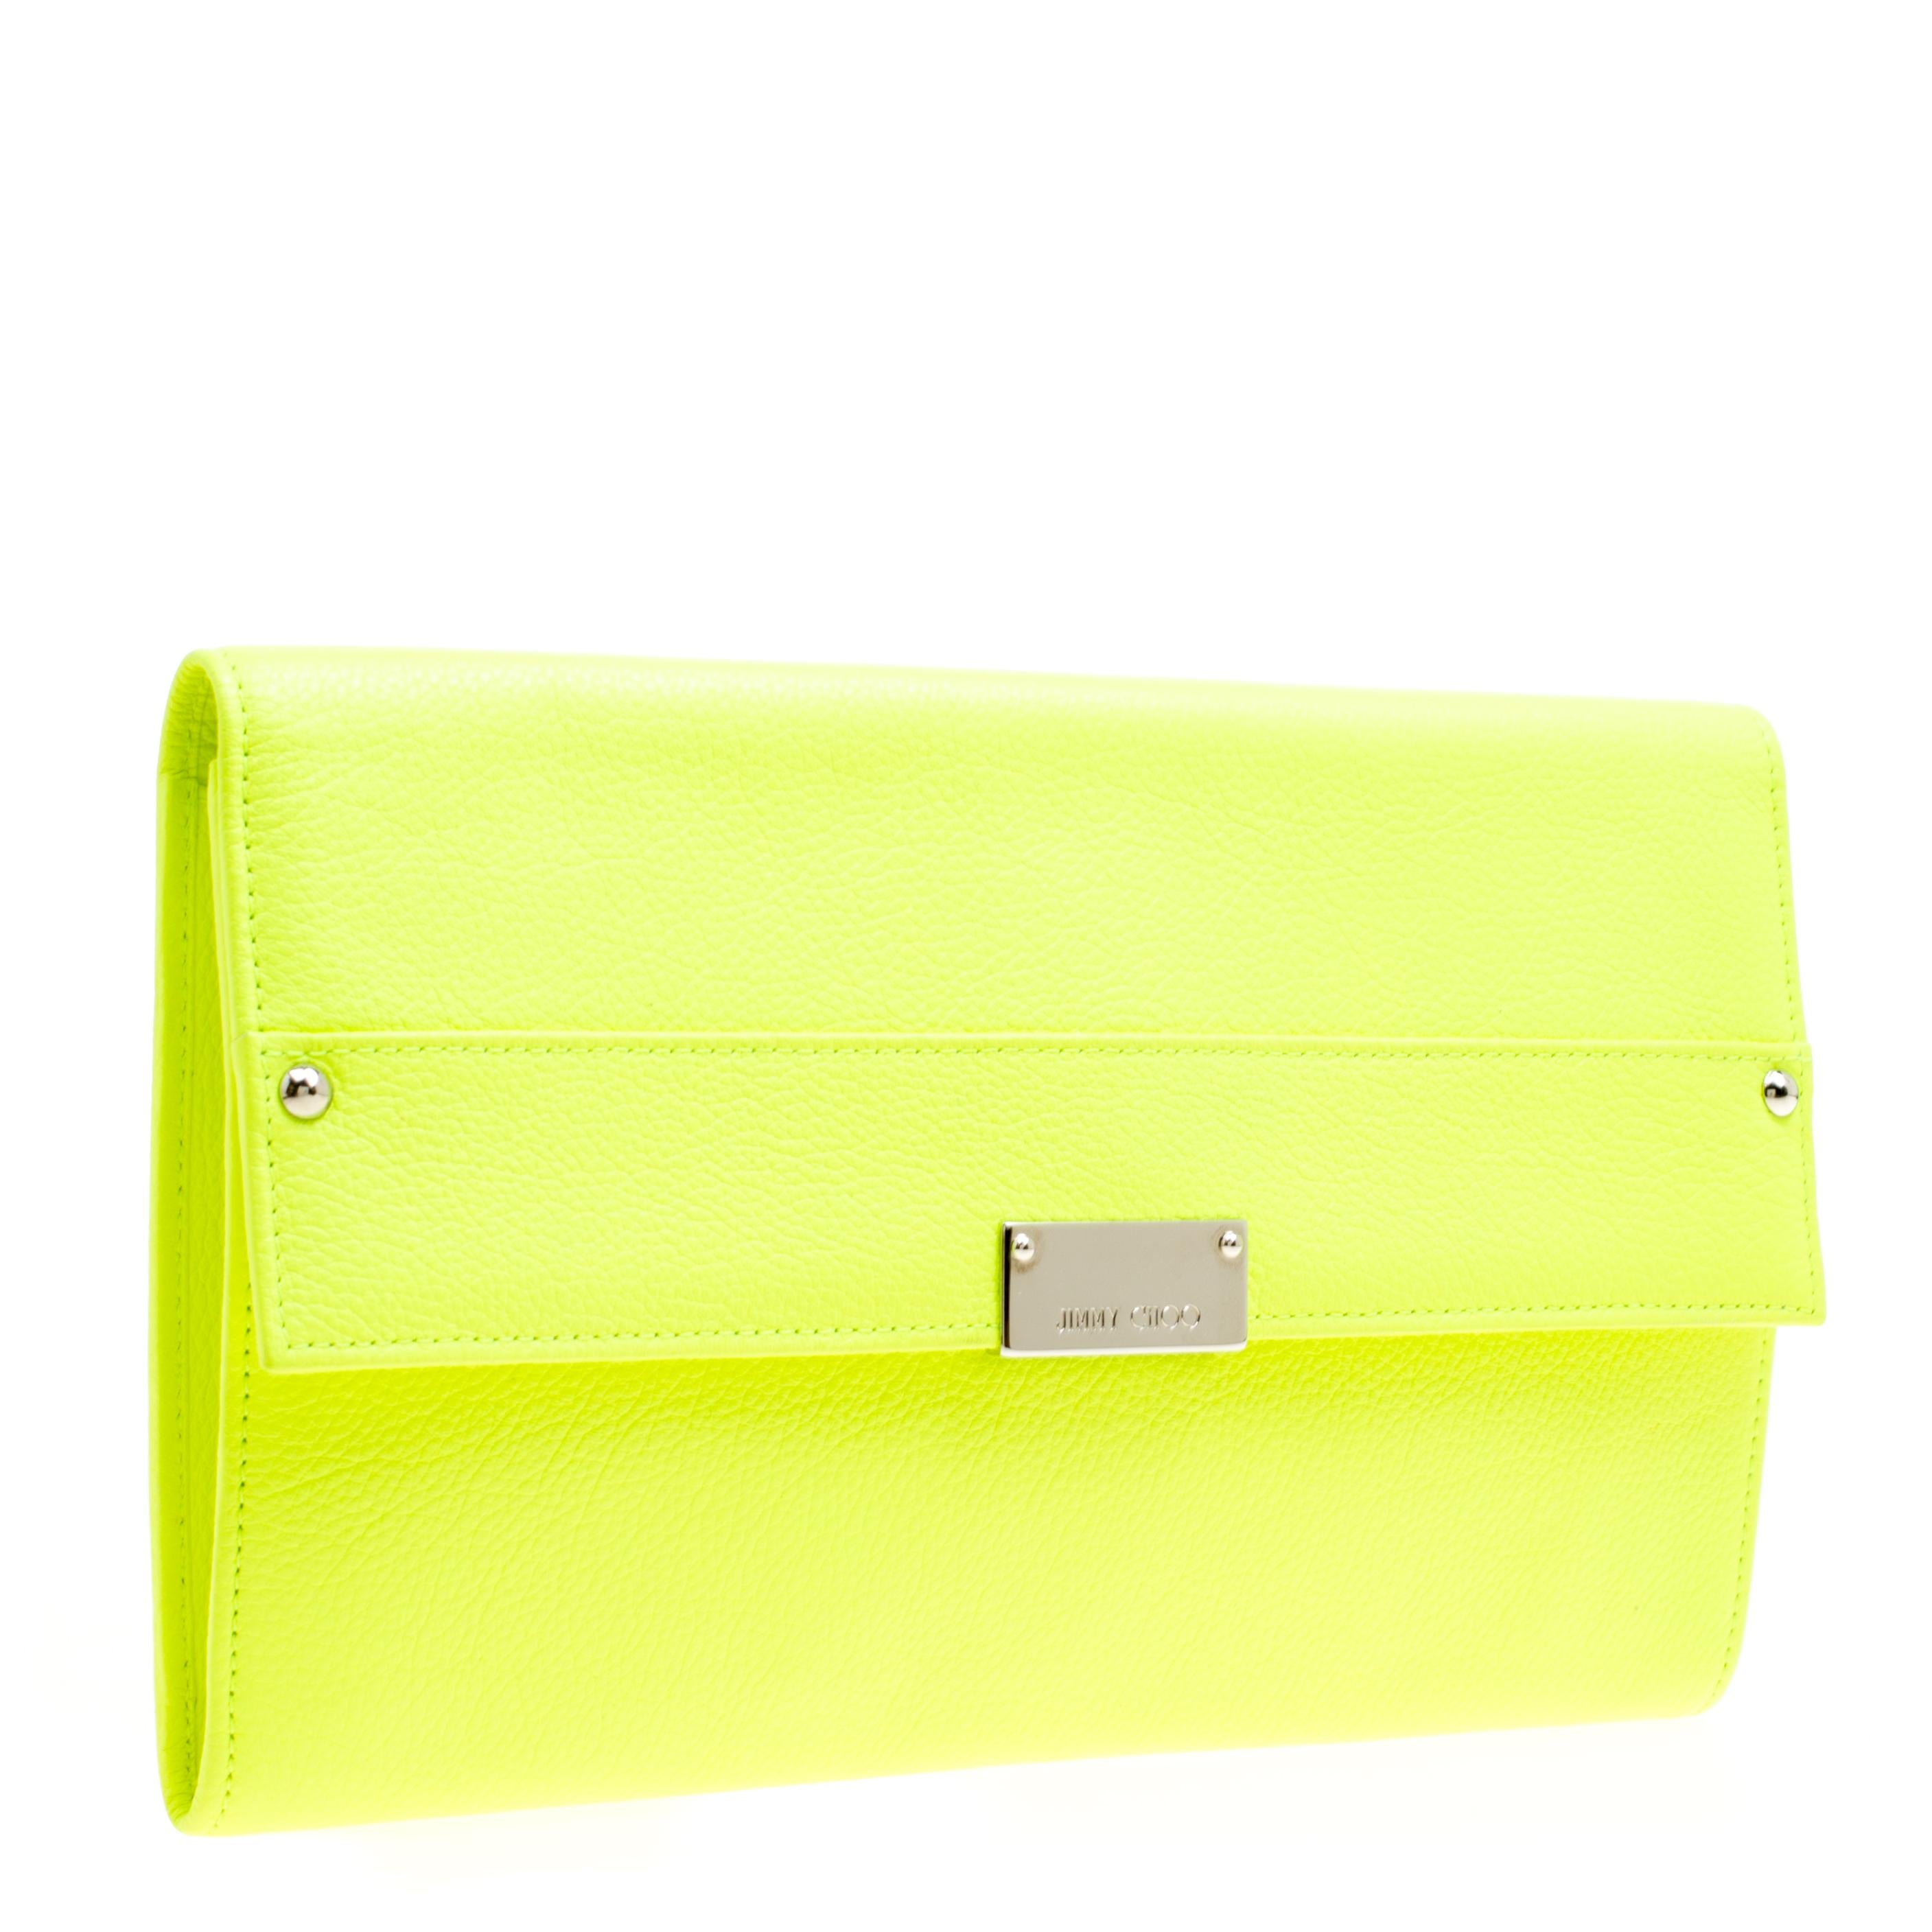 Yellow Jimmy Choo Fluorescent Green Leather Reese Wallet Clutch